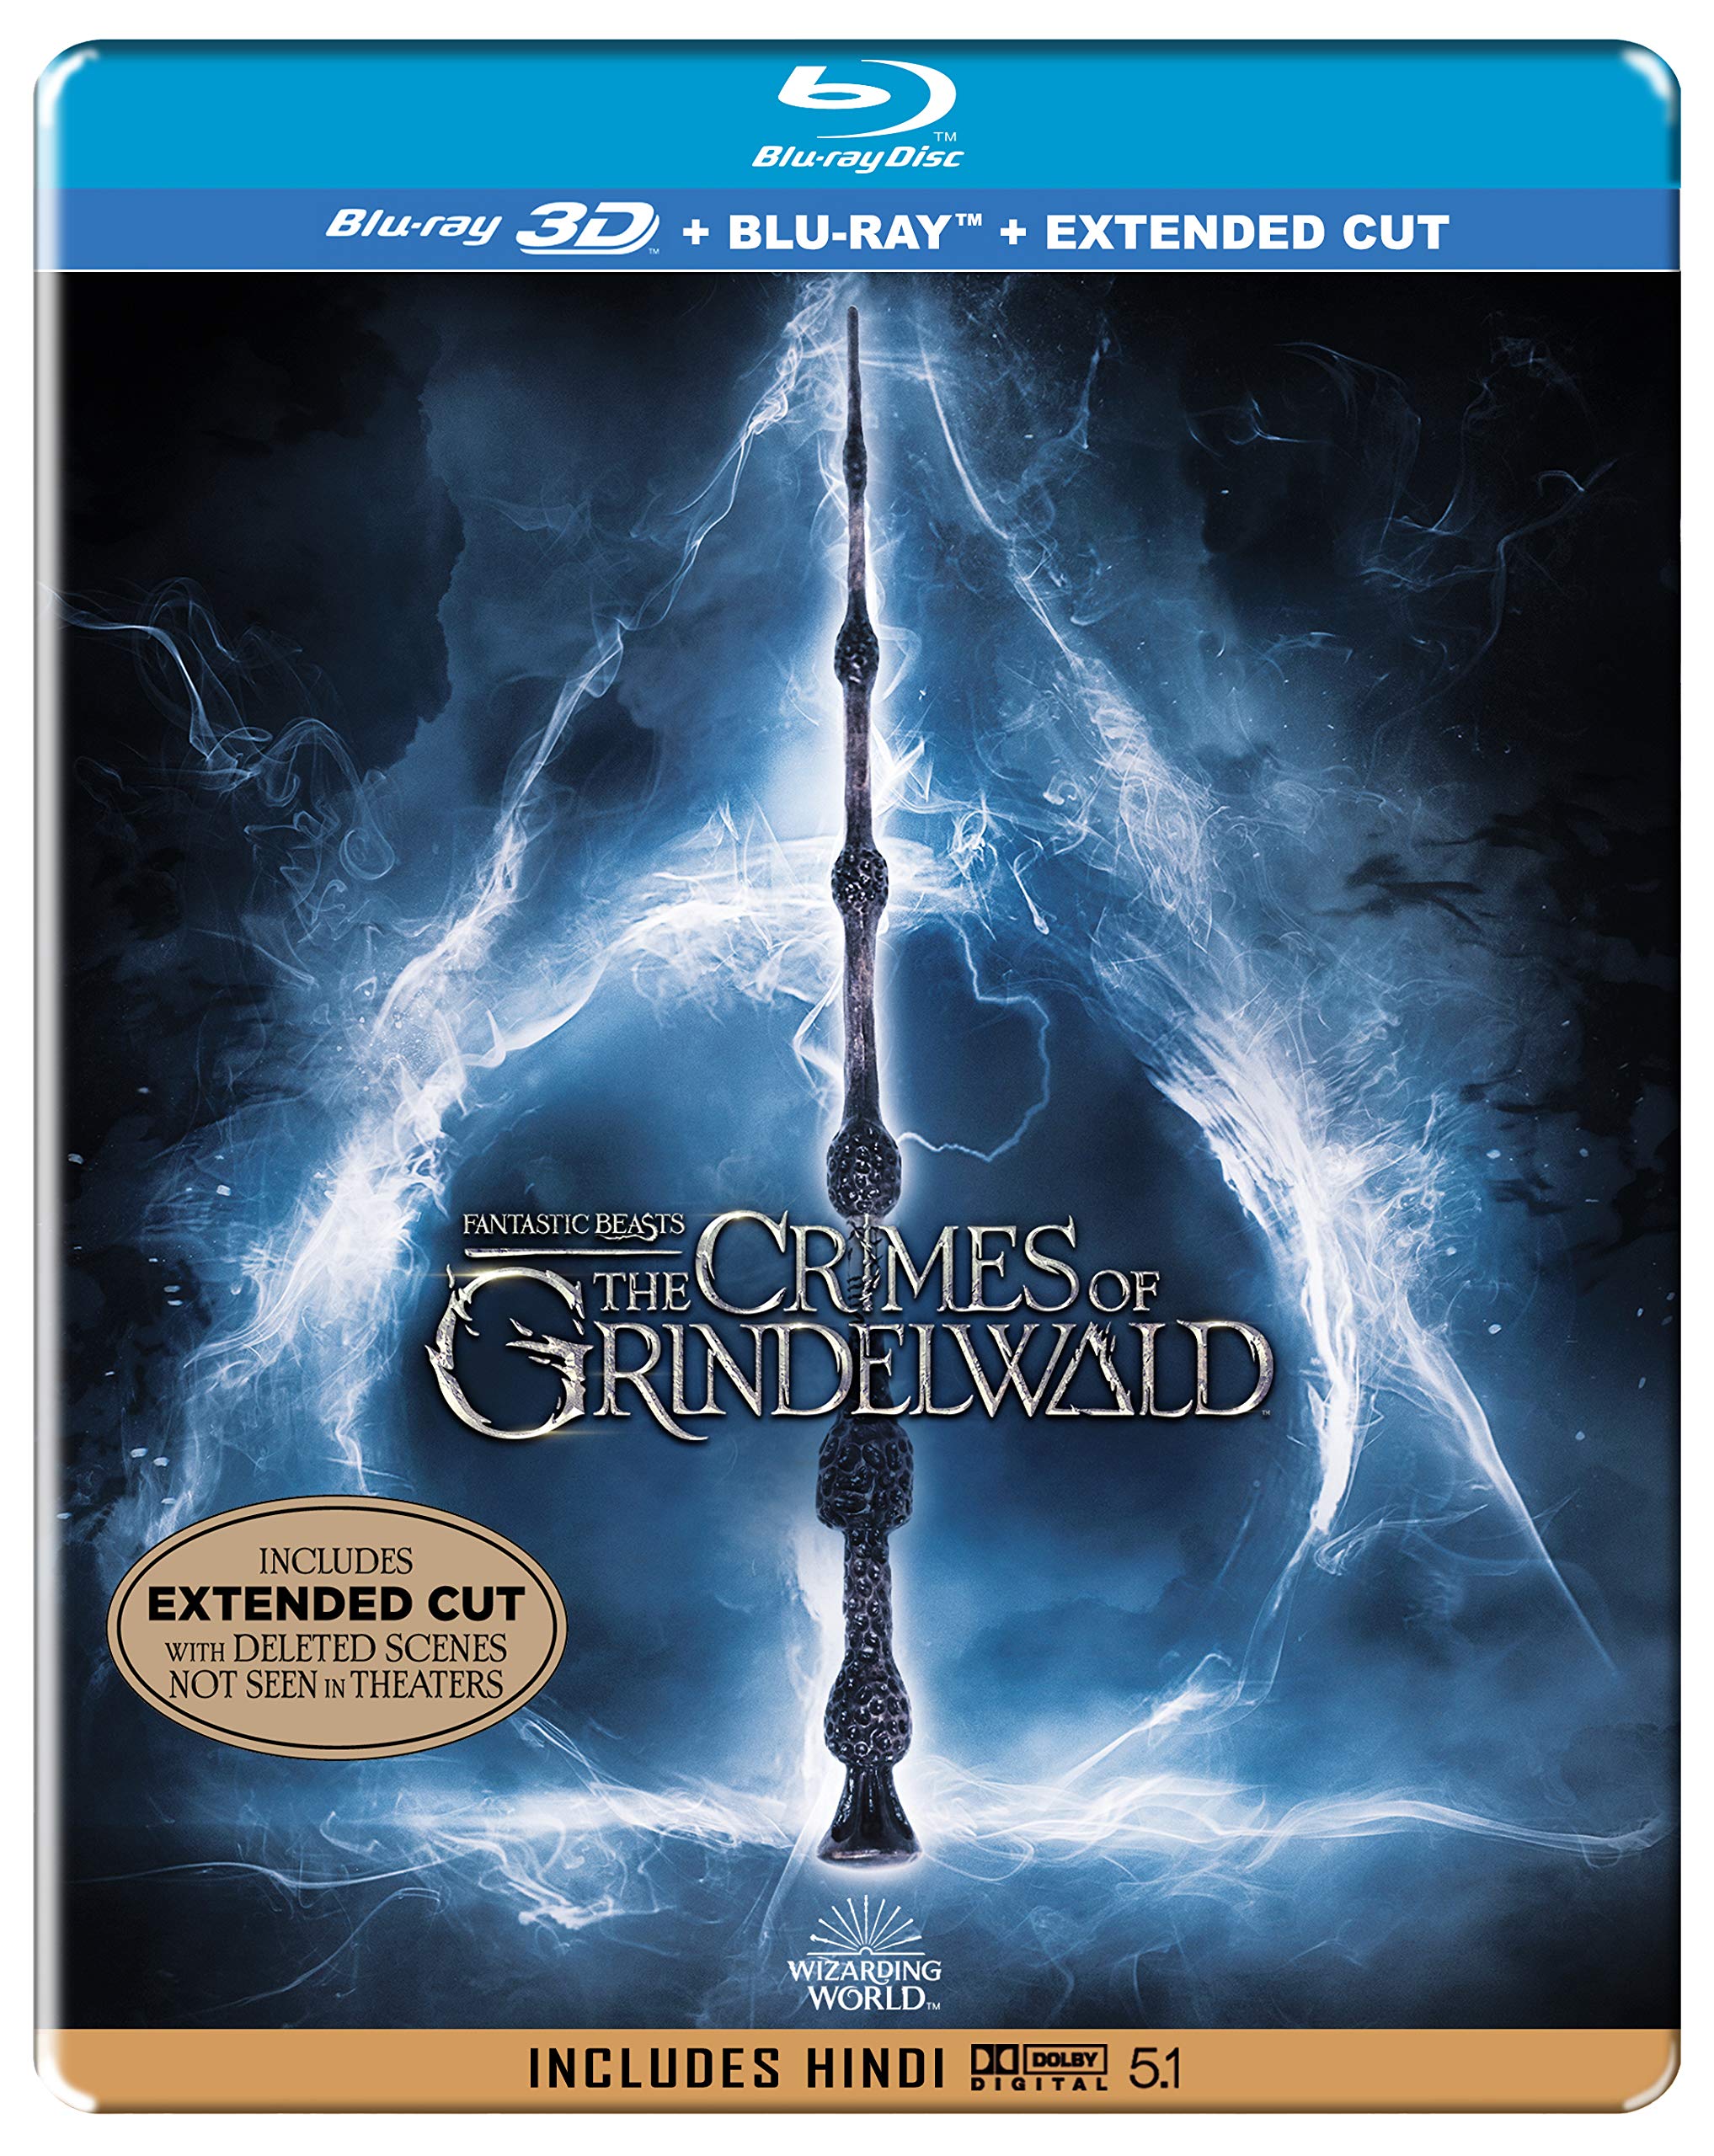 fantastic-beasts-the-crimes-of-grindelwald-steelbook-blu-ray-3d-blu-ray-extended-cut-3-disc